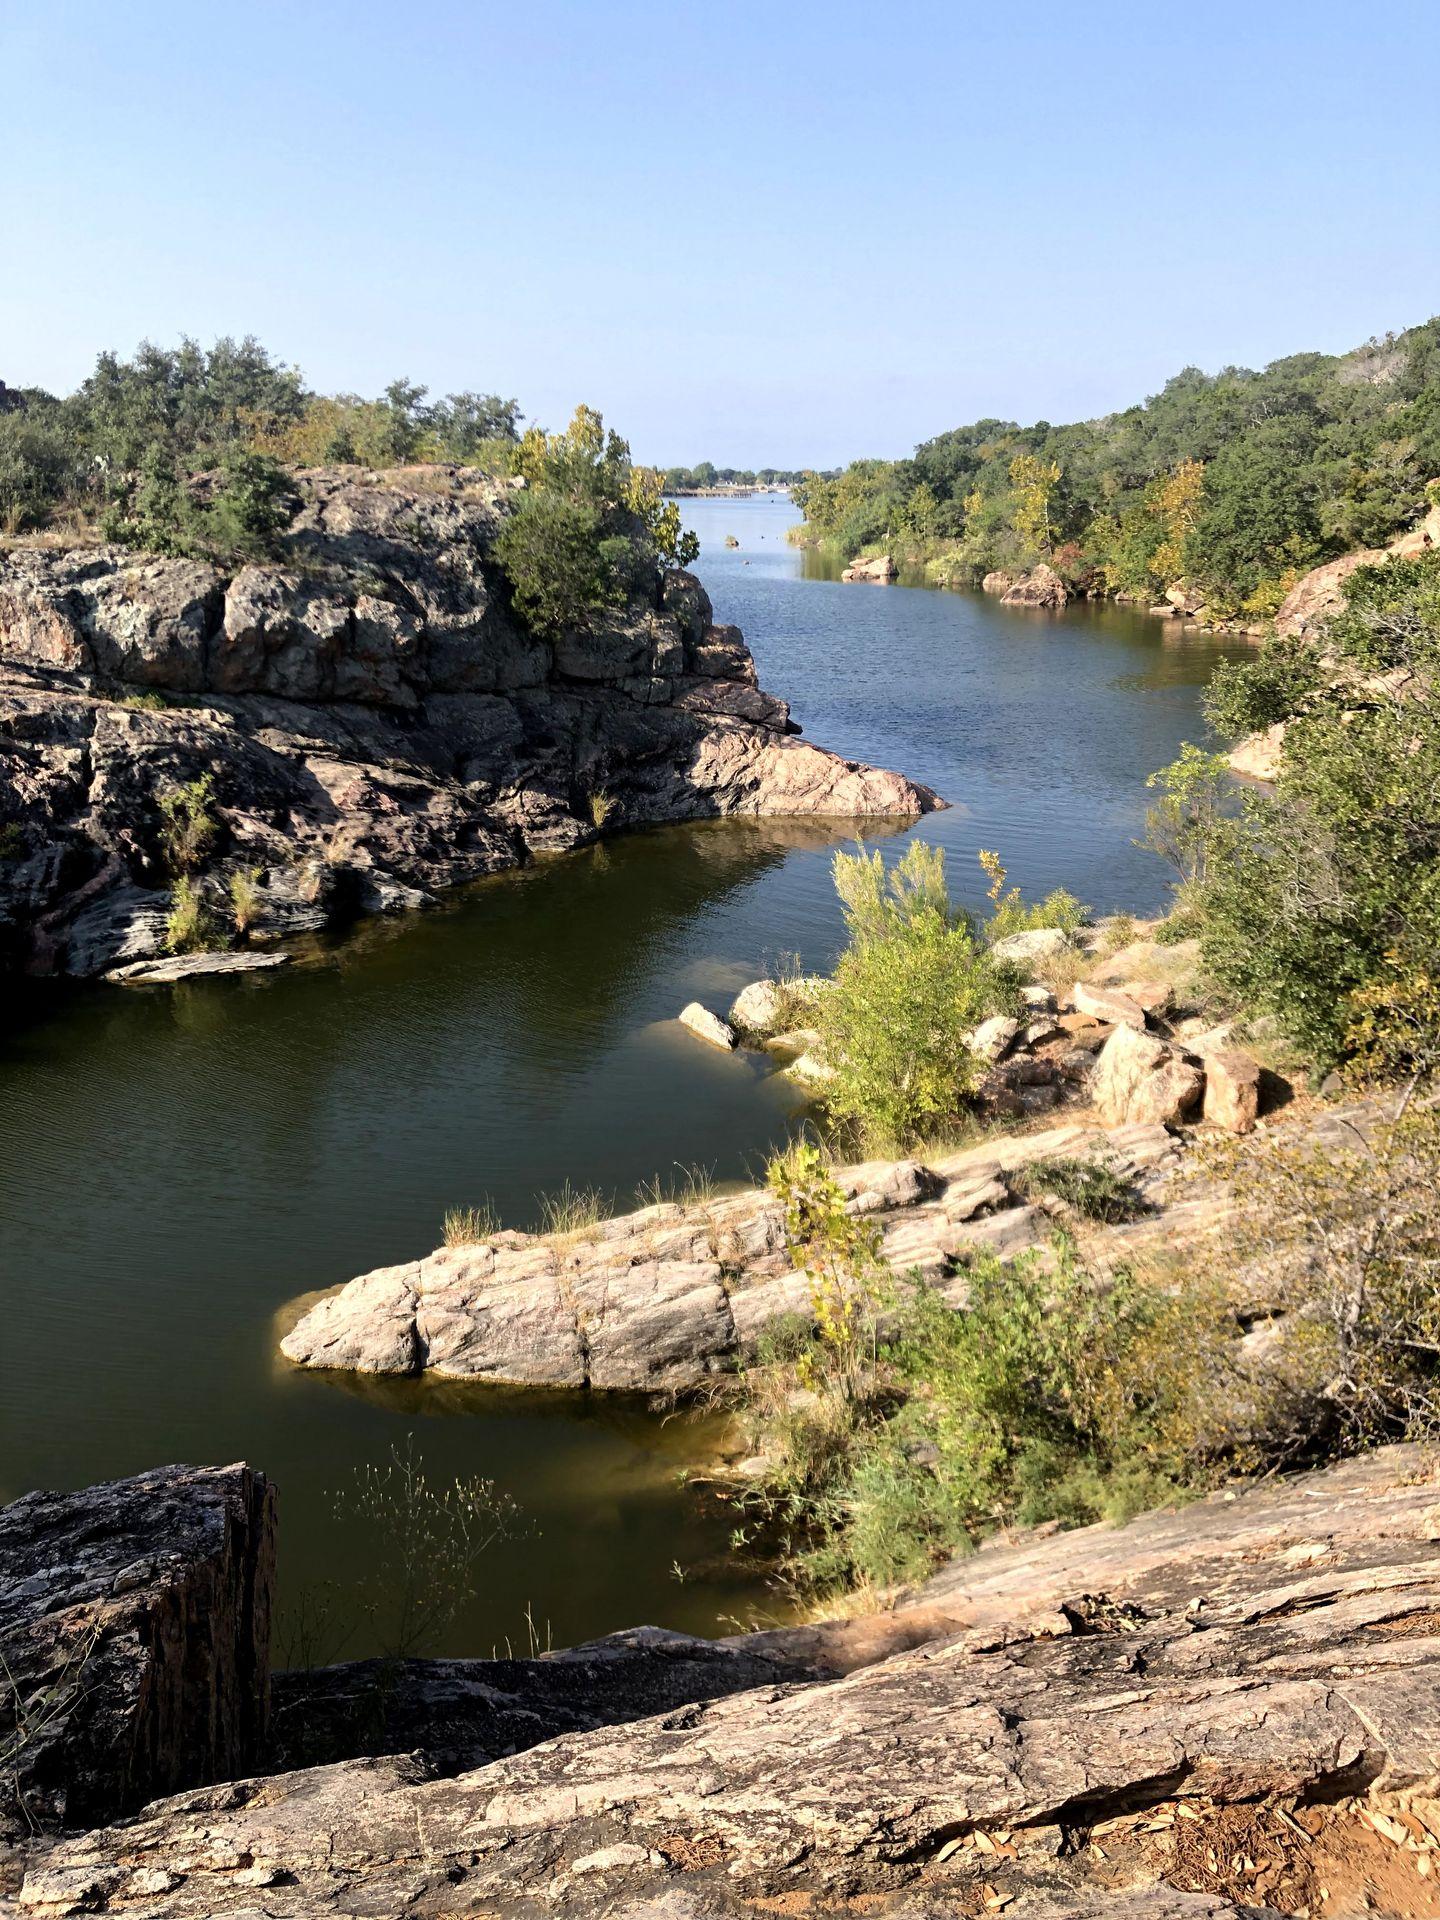 An area of water winding around rocks at Inks Lake State Park.